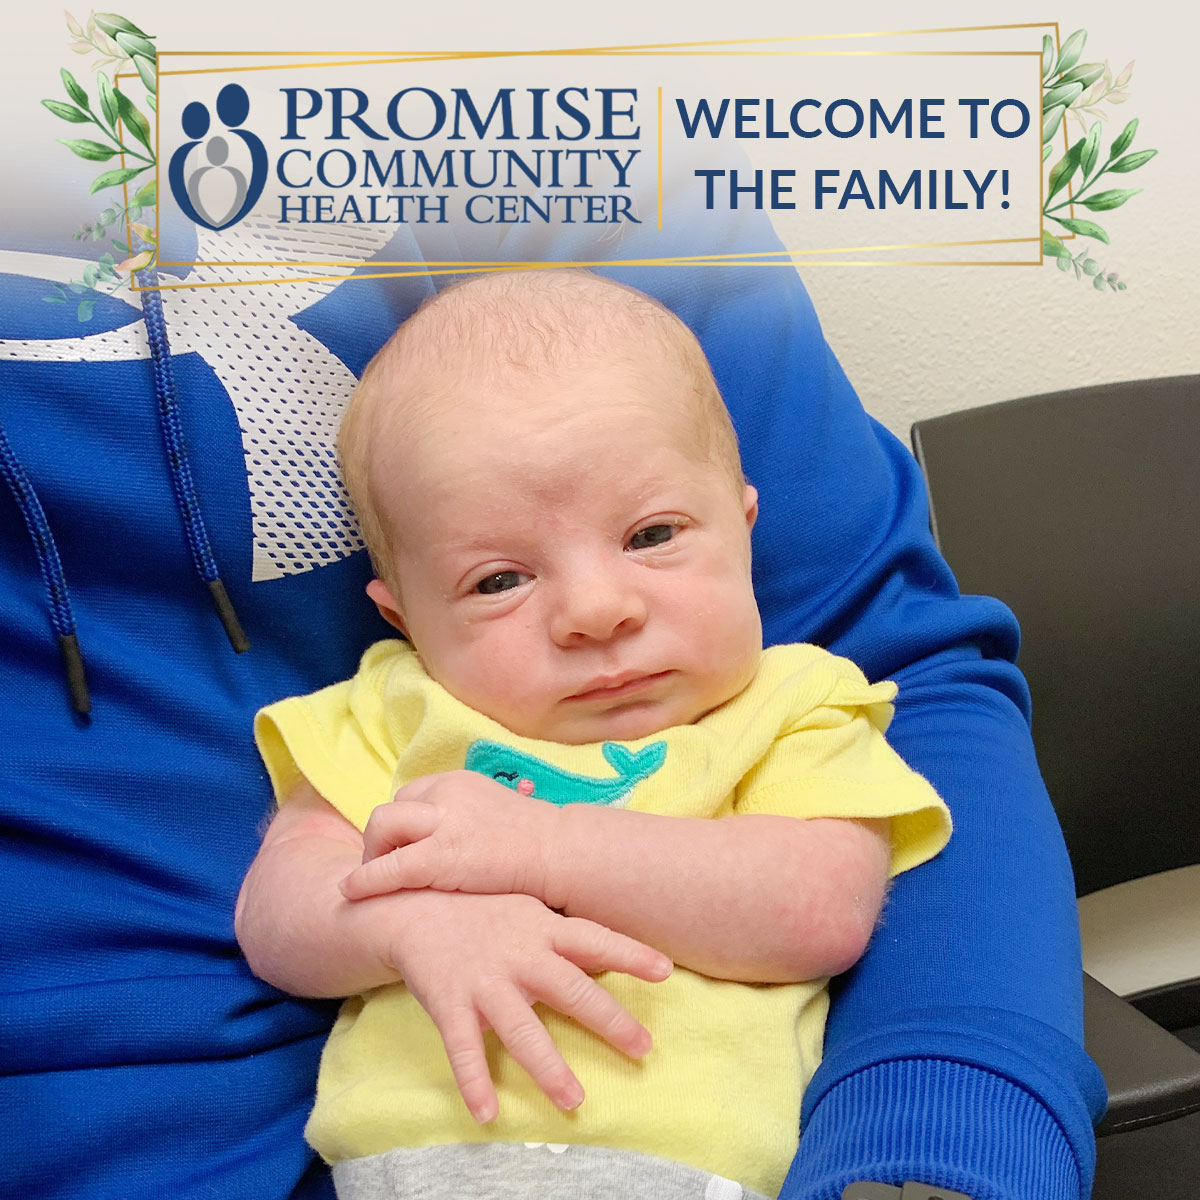 Hop Family in Moville, Iowa Home Birth | Promise Community Health Center in Sioux Center, Iowa | Home births in northwest Iowa, Home births in southeast South Dakota, Home births in southwest Minnesota | Home births in Sioux Falls South Dakota, Home births in Beresford South Dakota, Home births in Sioux City IA, Home births in LeMars IA, Home births in Worthington MN, Home births in Iowa, Home births in South Dakota, Home births in Minnesota